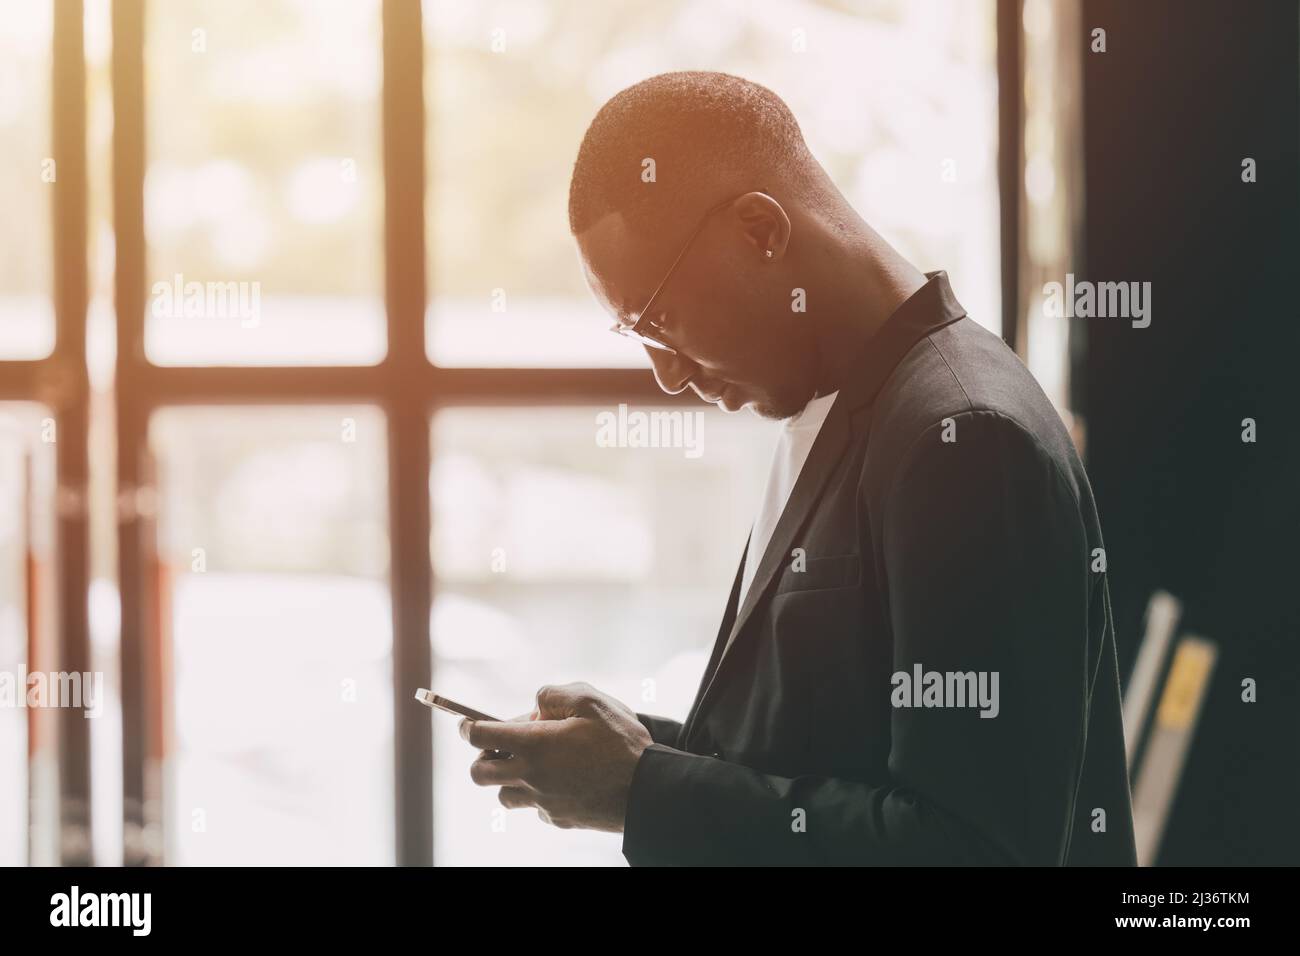 black business man using smartphone touch screen for contact people Stock Photo